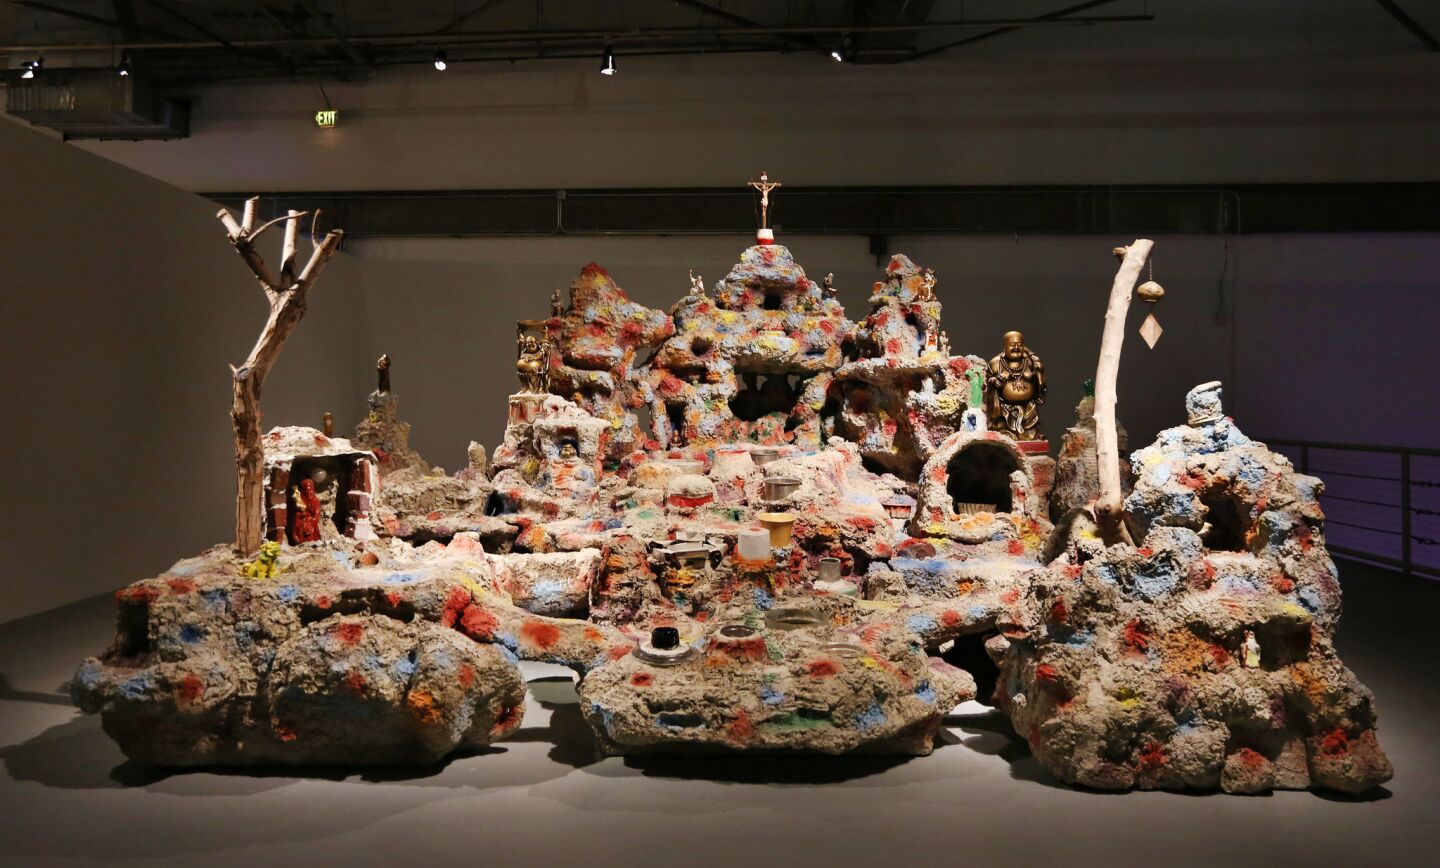 Mike Kelley's replica of the wishing-well mountain in Chinatown is part of the installation "Framed and Frame," on display at MOCA's Geffen Contemporary.